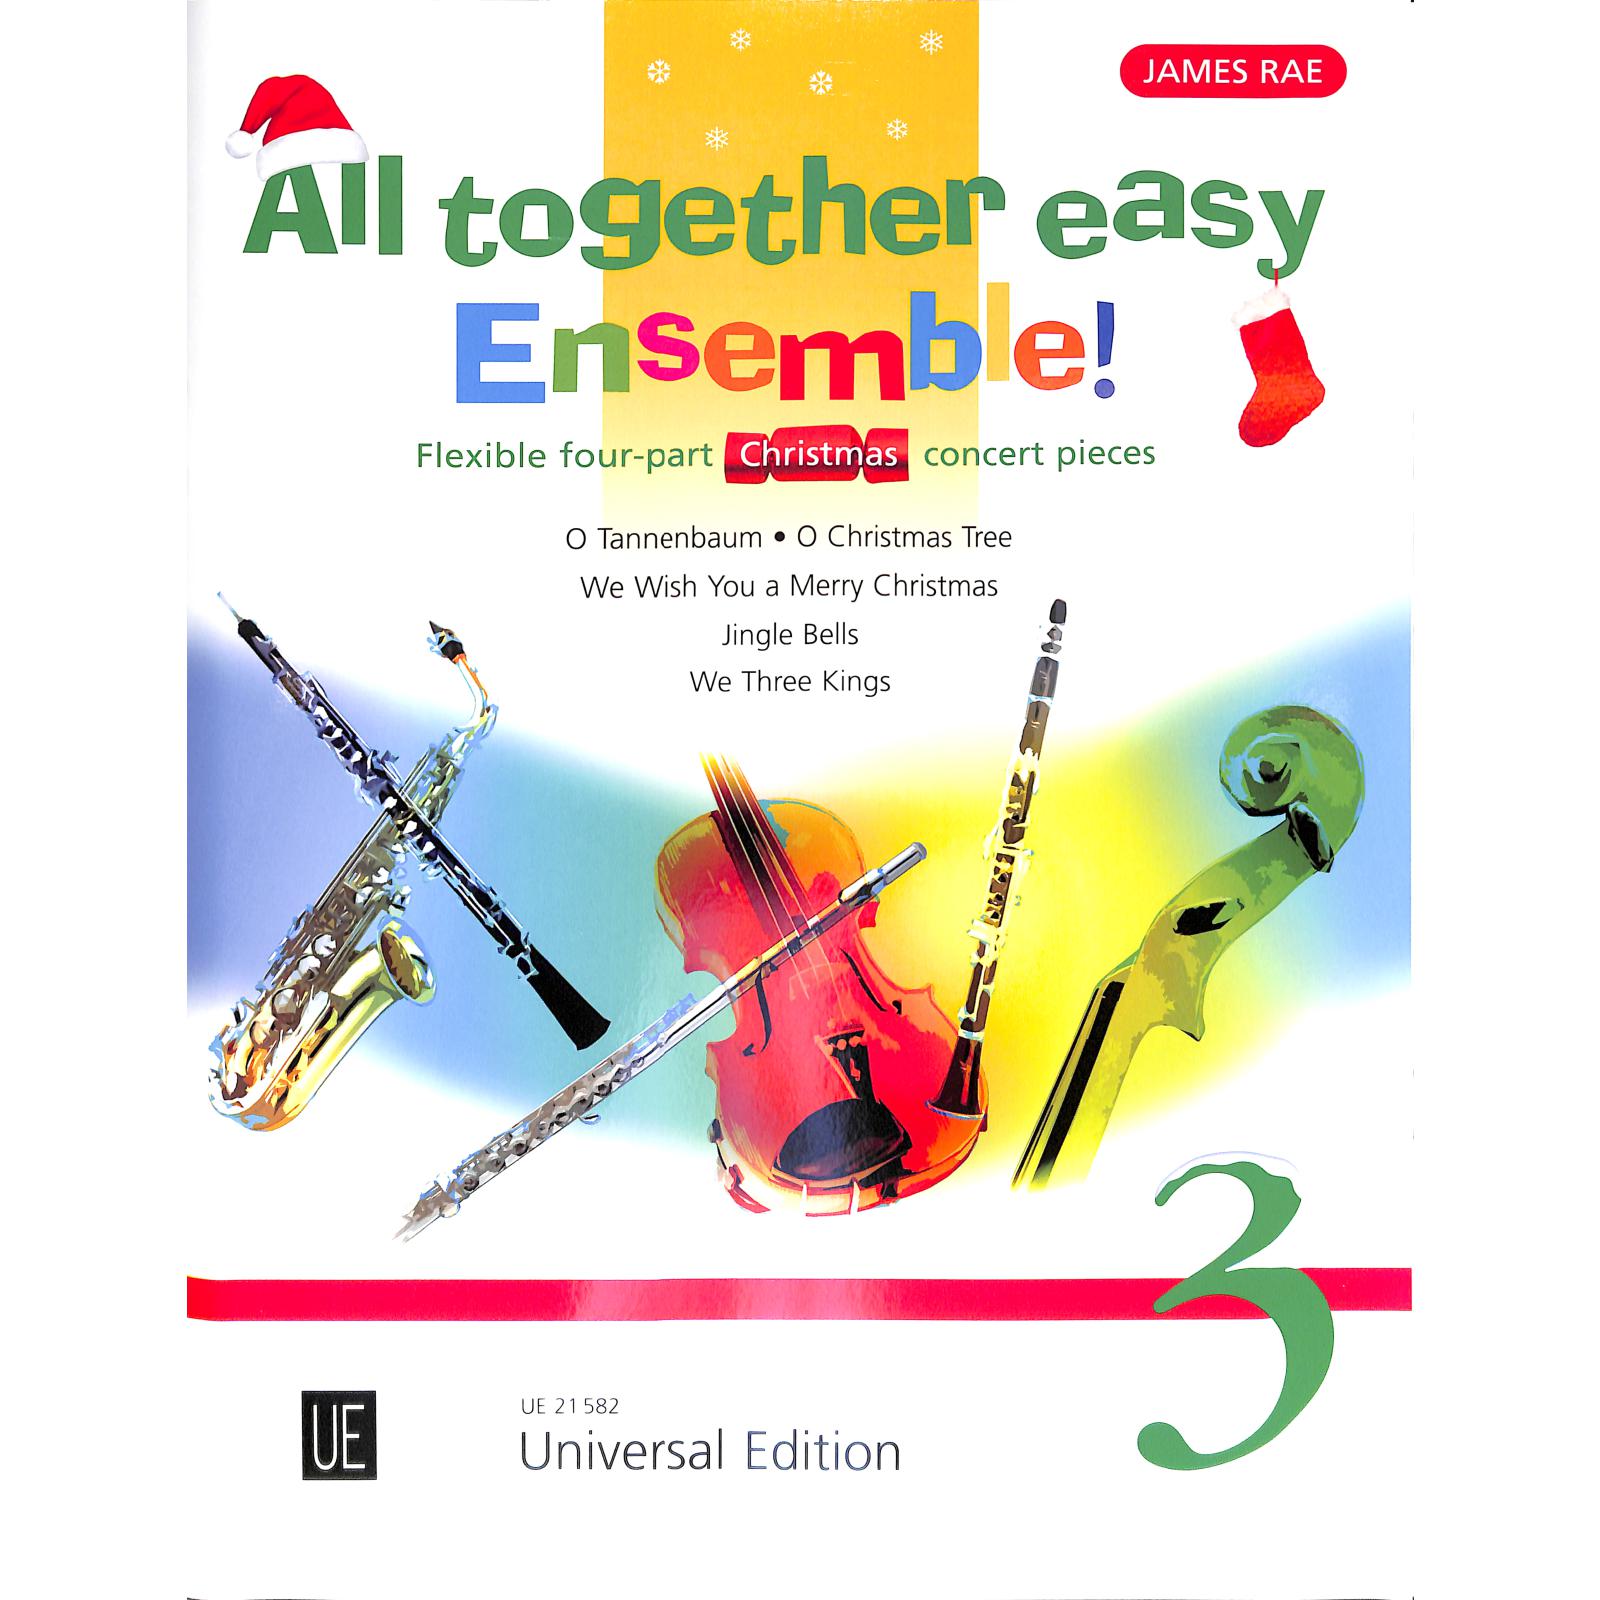 All Together easy Christmas Ensemble 3 - Flexible 4 Part